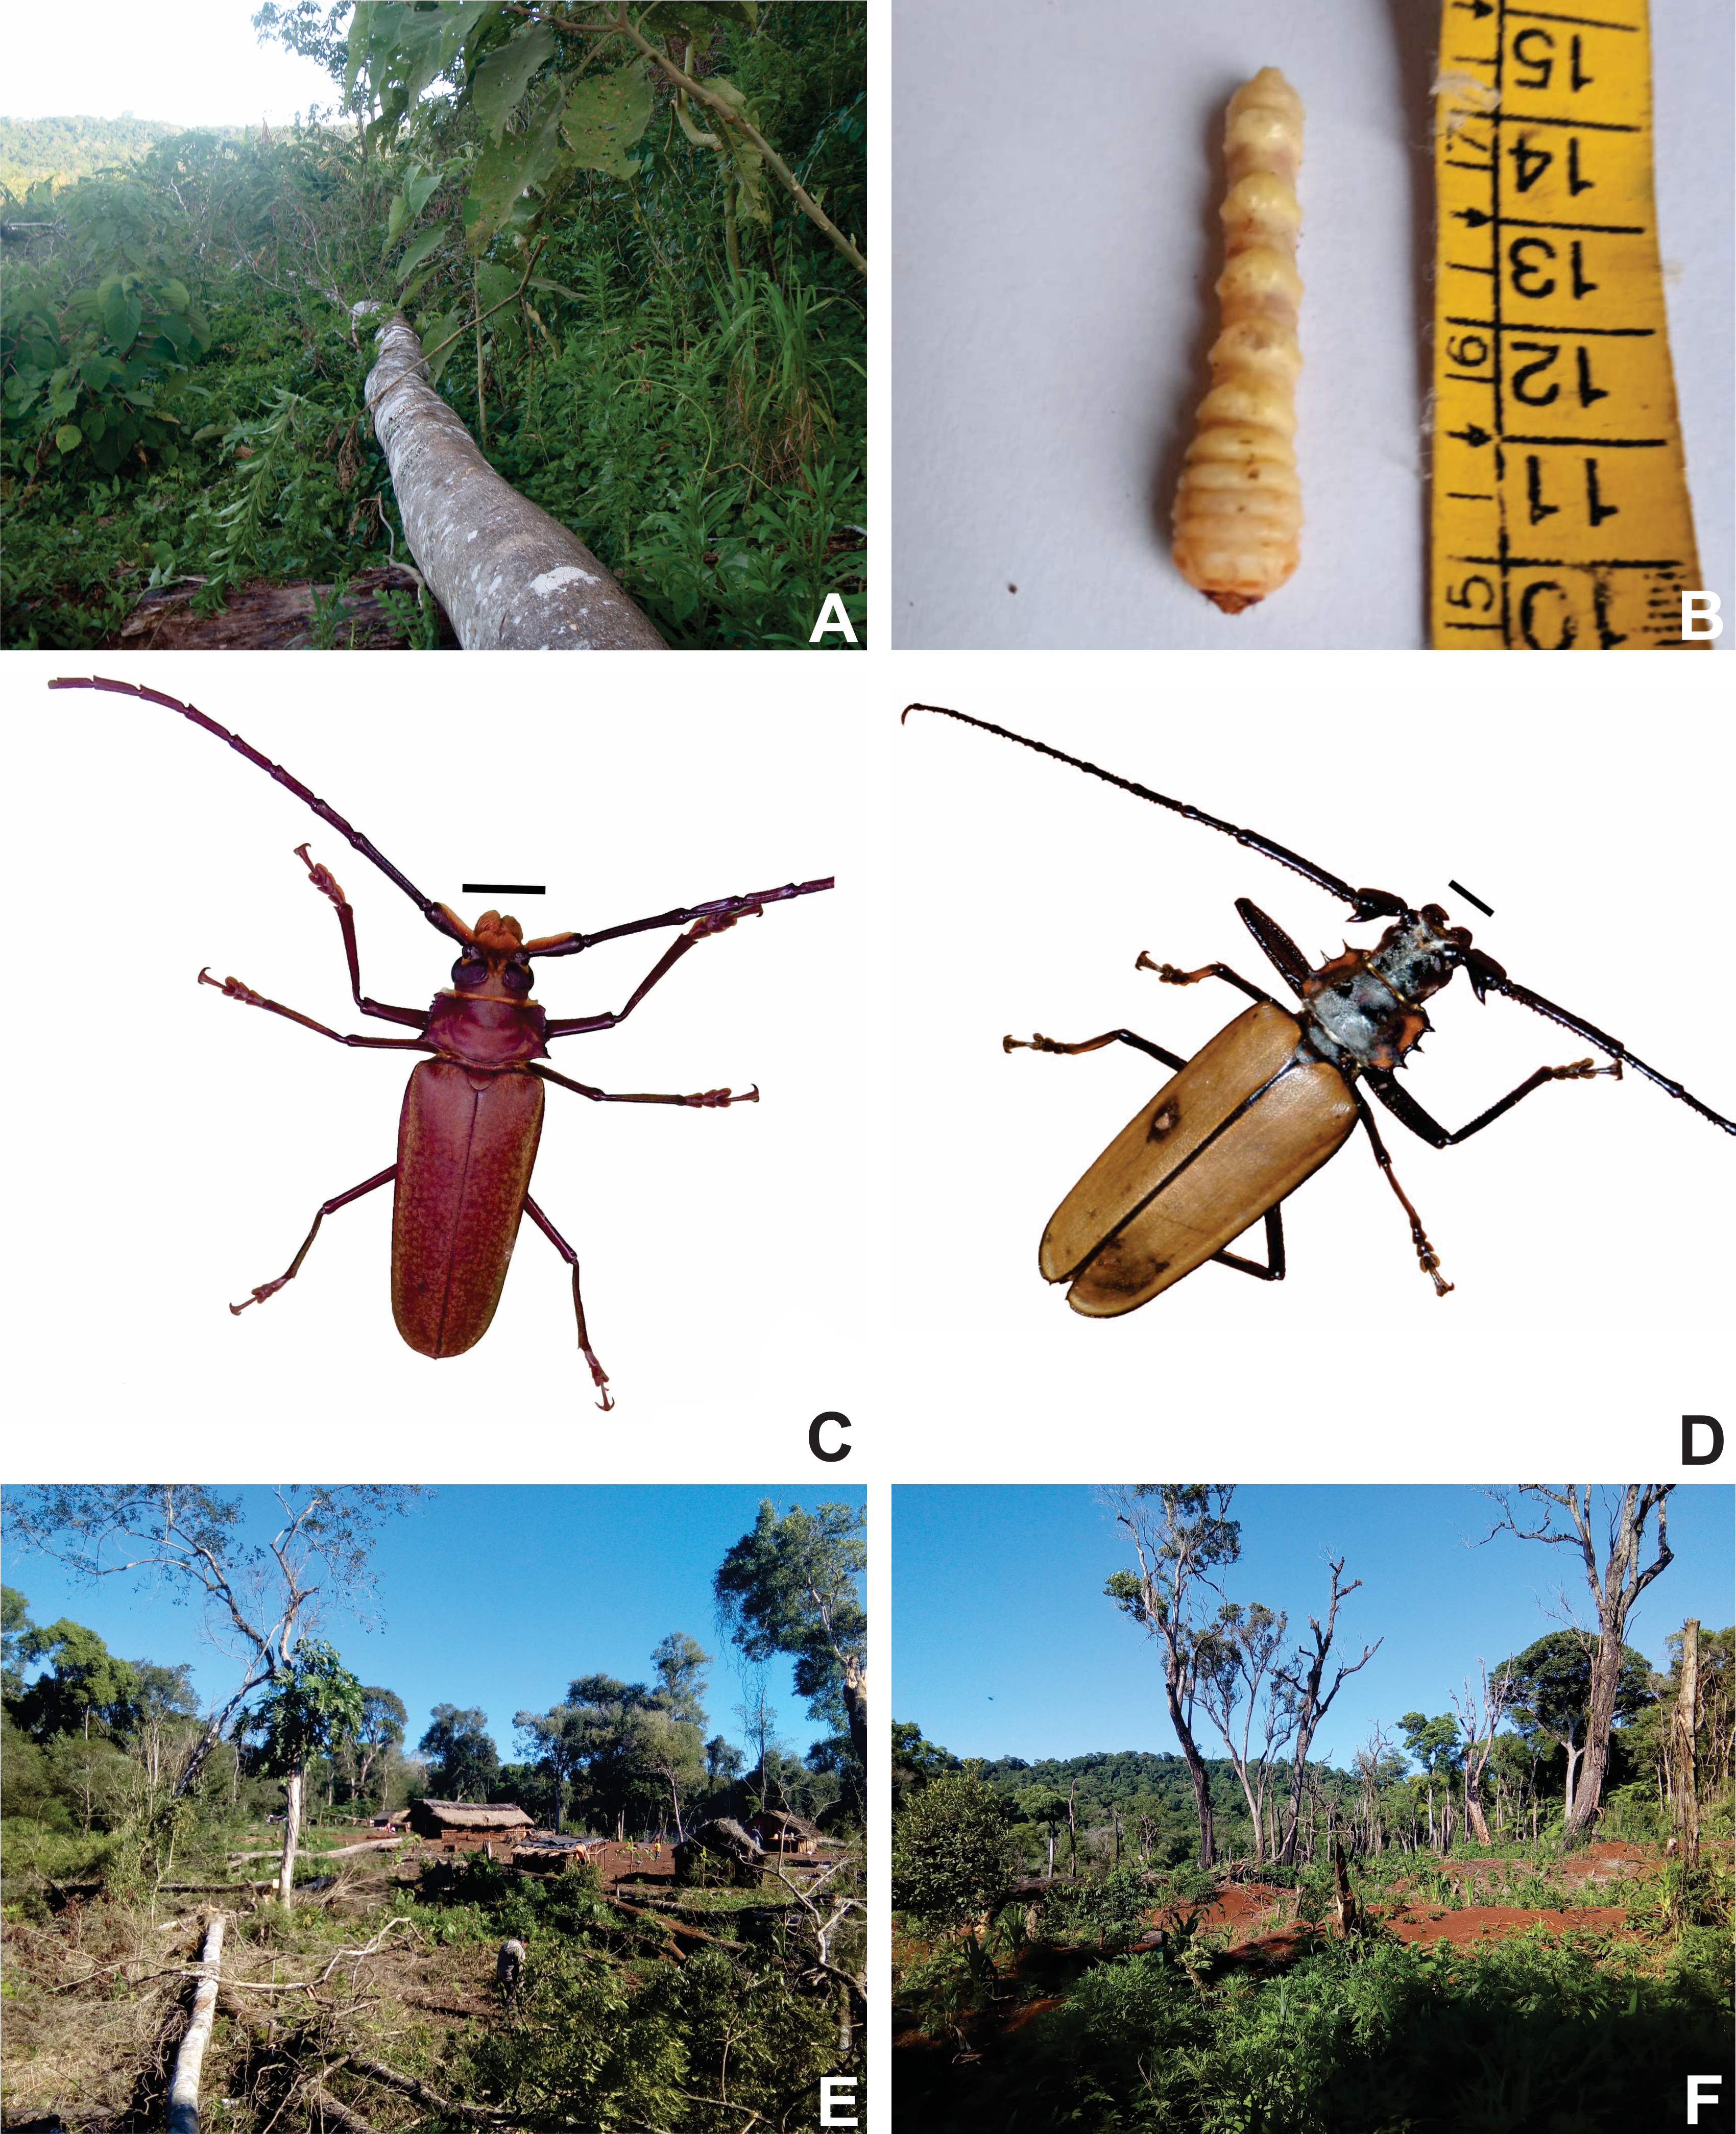 Figure 2 A Tree specimen of yvyra ñechĩ, (Balfourodendron ridelianum) felled for larval production. B ycho akambe edible cerambiciform larva. C Orthomegas jaspideus (scale-1 cm). D Male adult insect Enoplocereus armillatus (scale-1 cm). E Preparation of the land for agriculture. F Growing area.